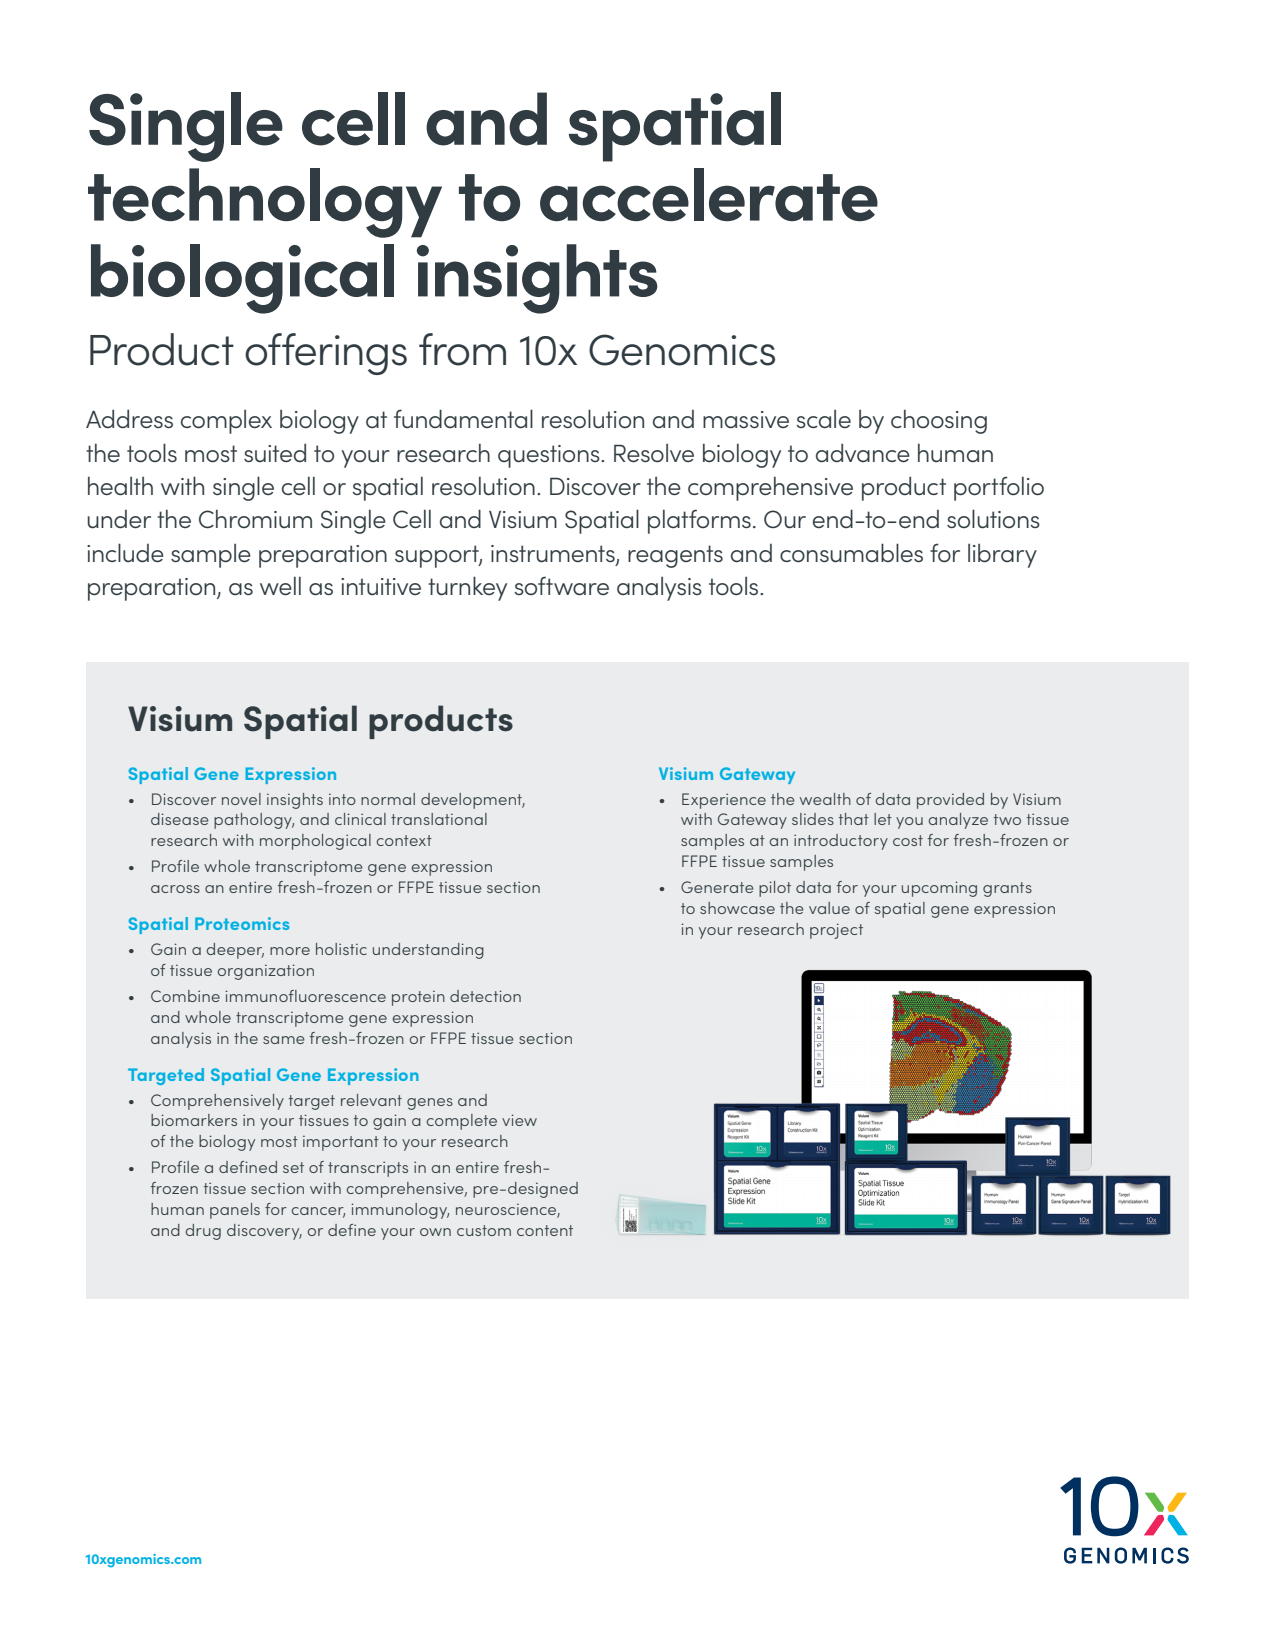 Single cell and spatial technology to accelerate biological insights - Product Offerings from 10x Genomics